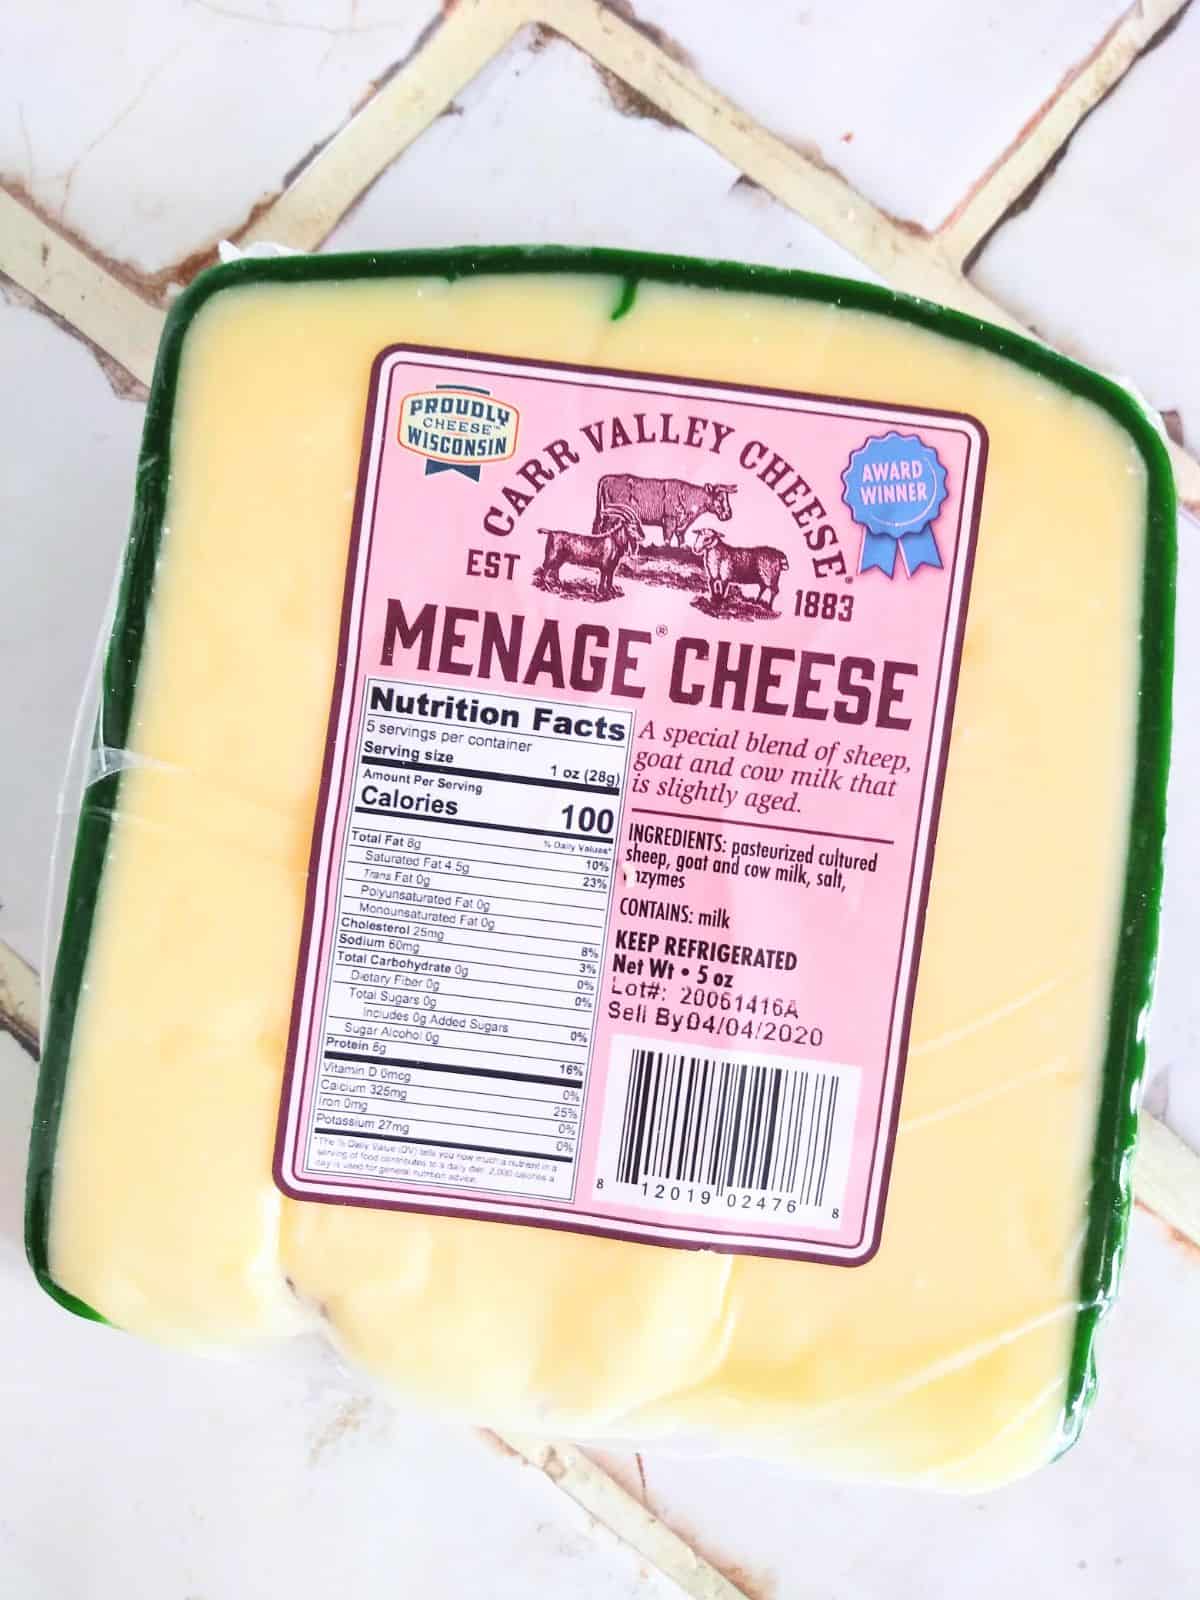 Carr Valley Menage Cheese with a green rind on a white tile countertop